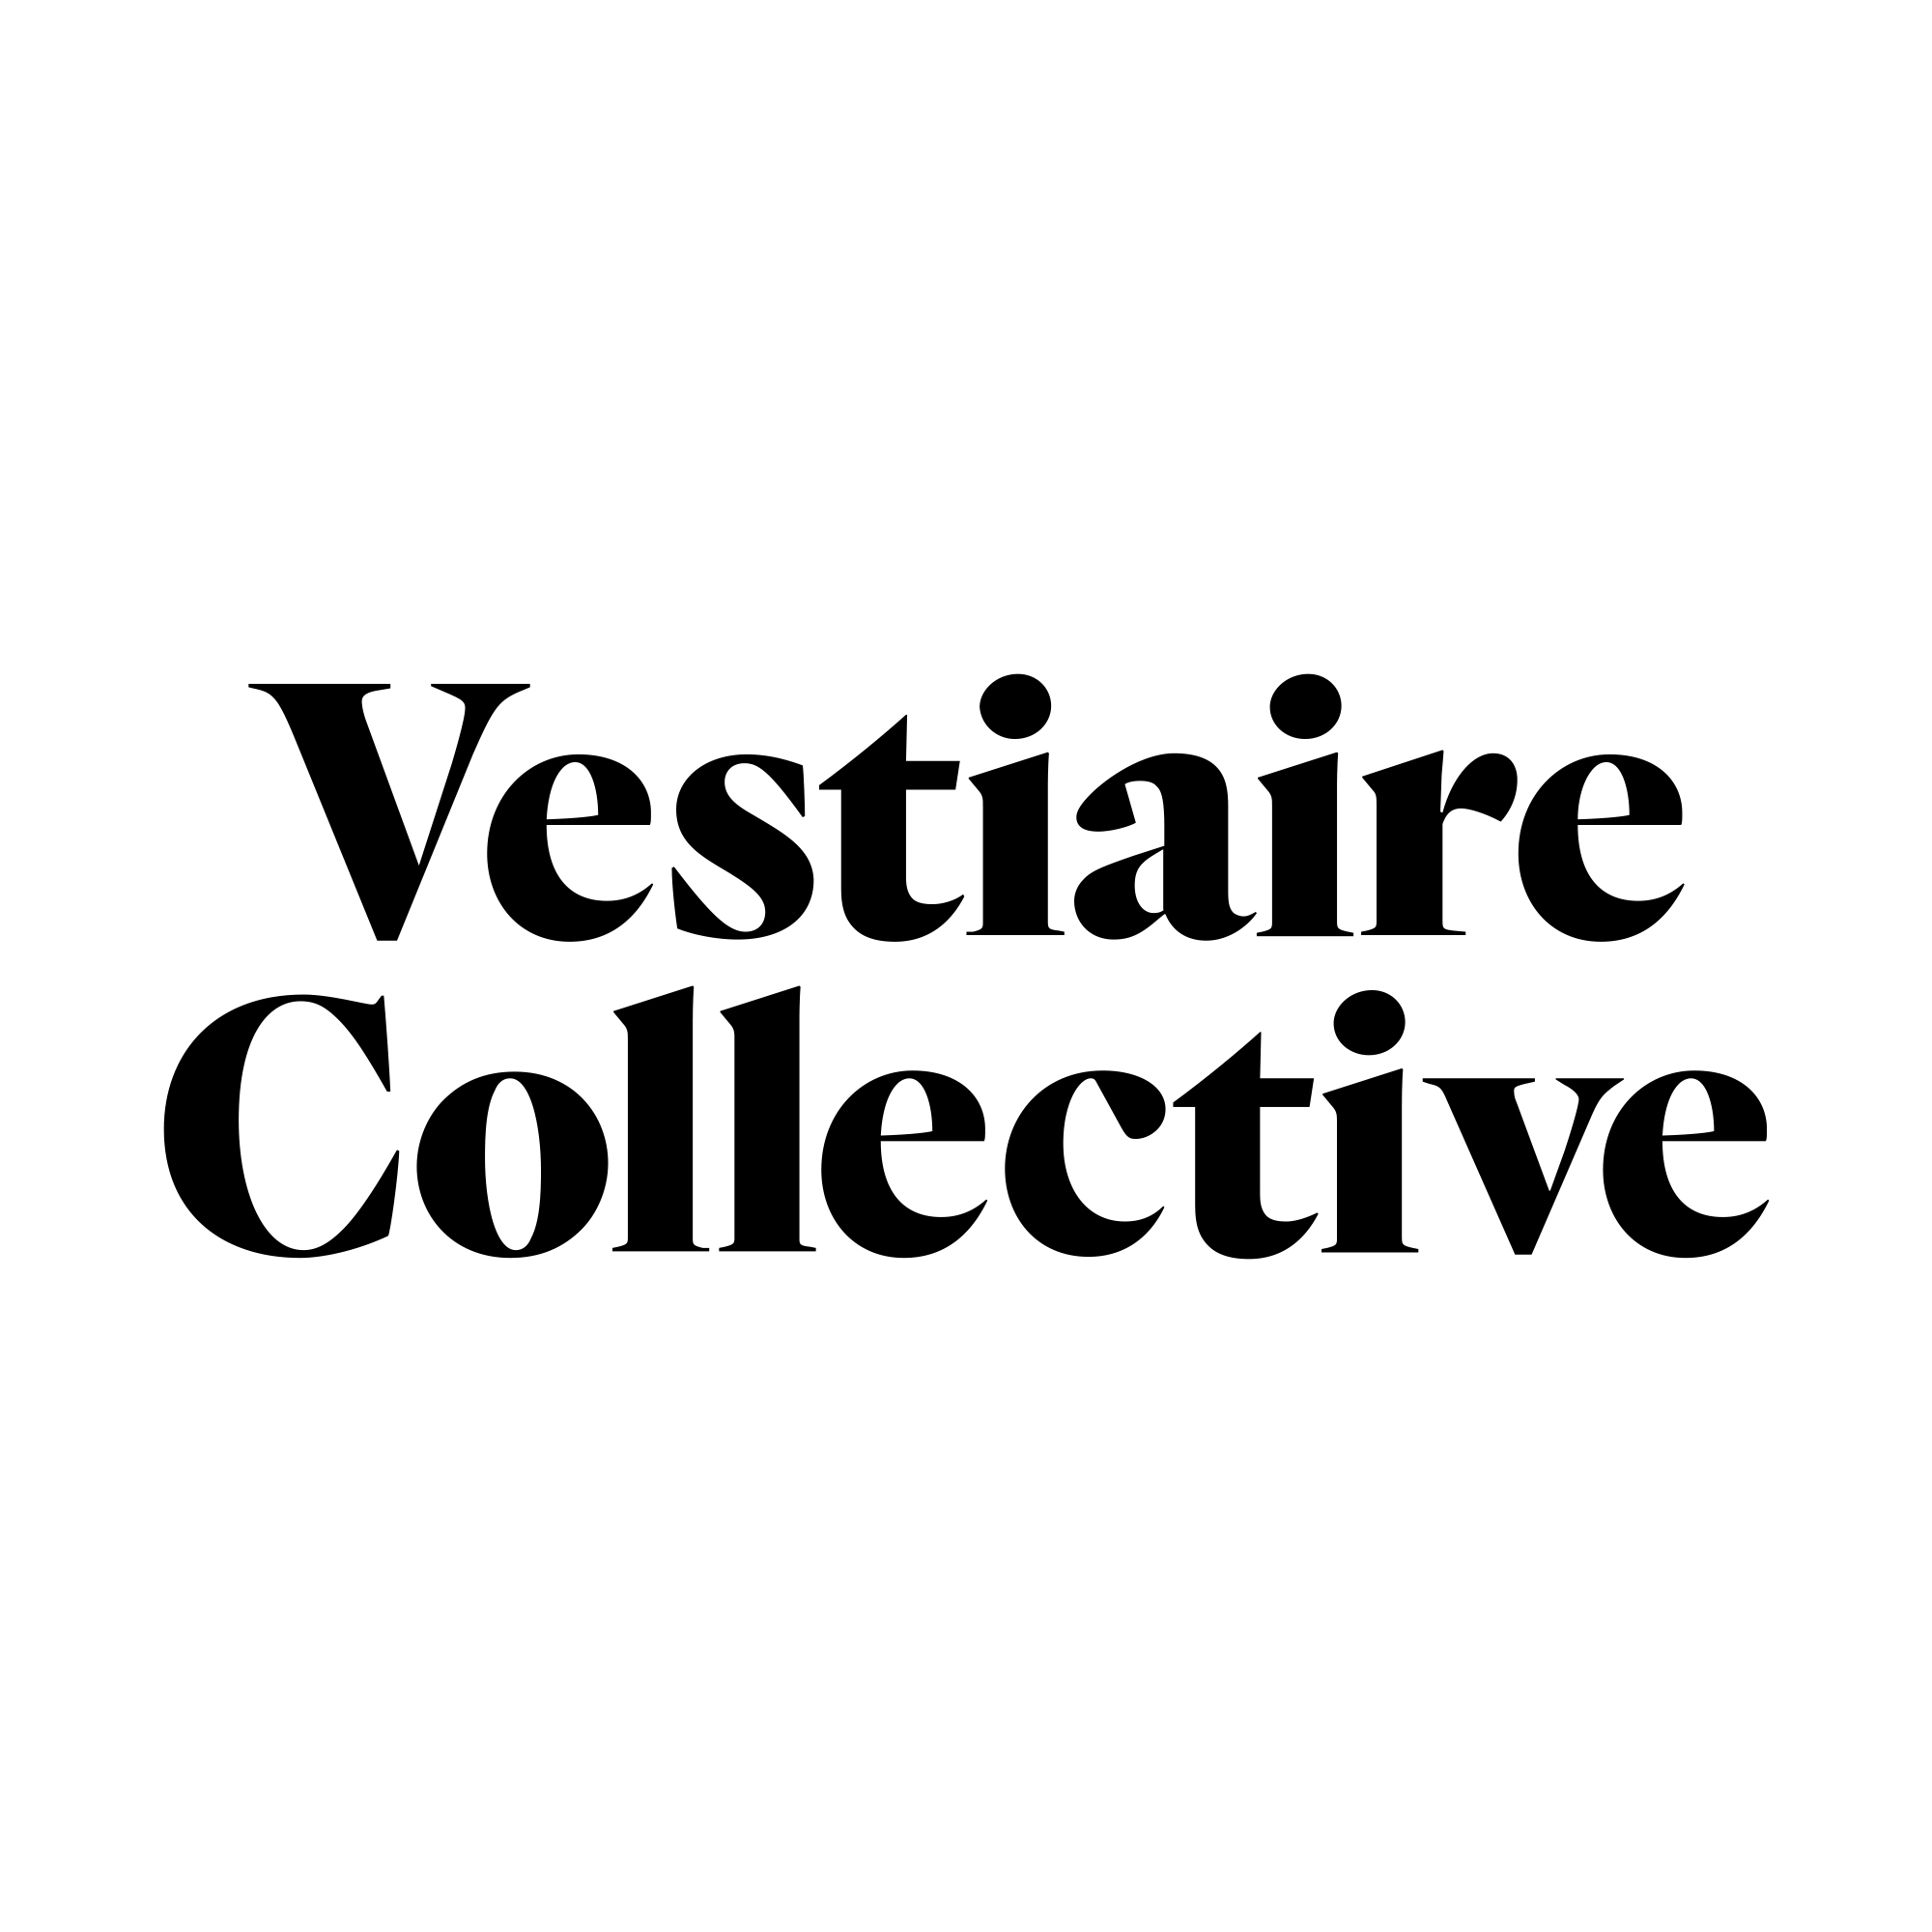 Download Vestiaire Collective Logo PNG and Vector (PDF, SVG, Ai